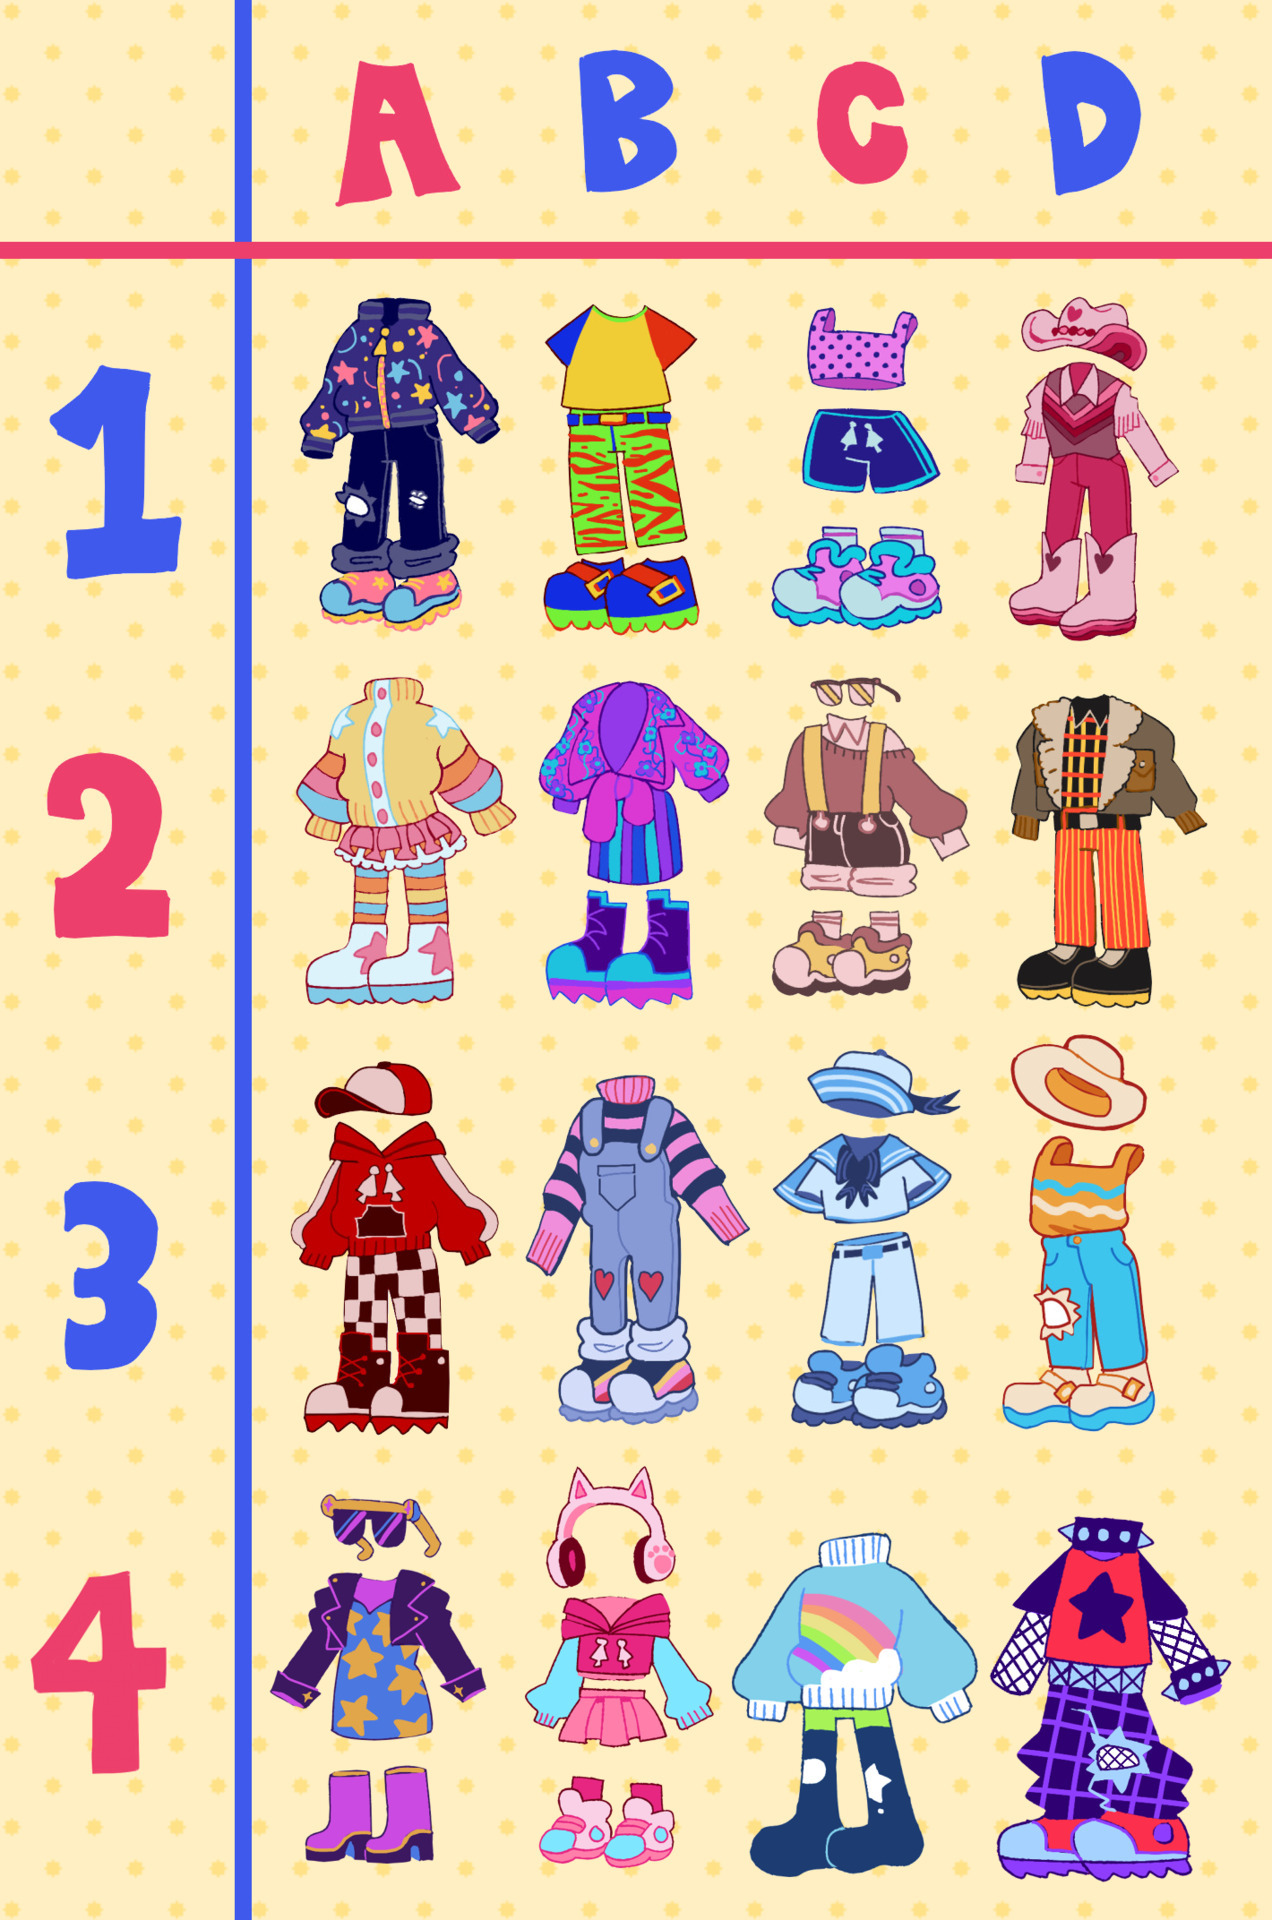 shehergyro:
“ heres the new and improved outfit art meme i made, i added an extra row and everything! :3 if you do this then feel free to change things about the outfit like the details or colors if you’d like, improvising is always good! also don’t...